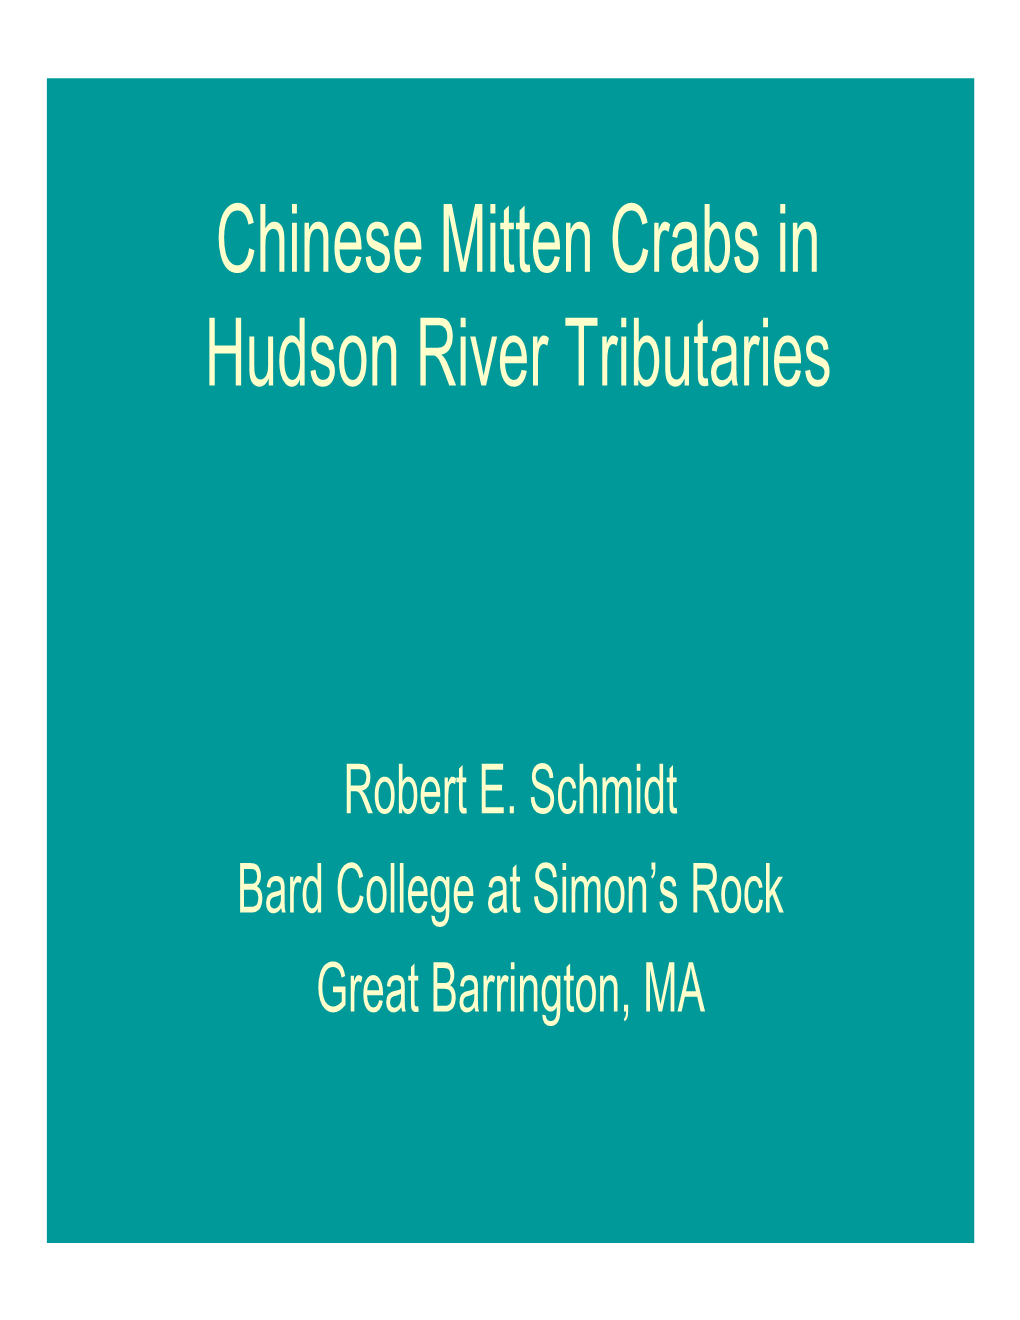 Chinese Mitten Crabs in Hudson River Tributaries